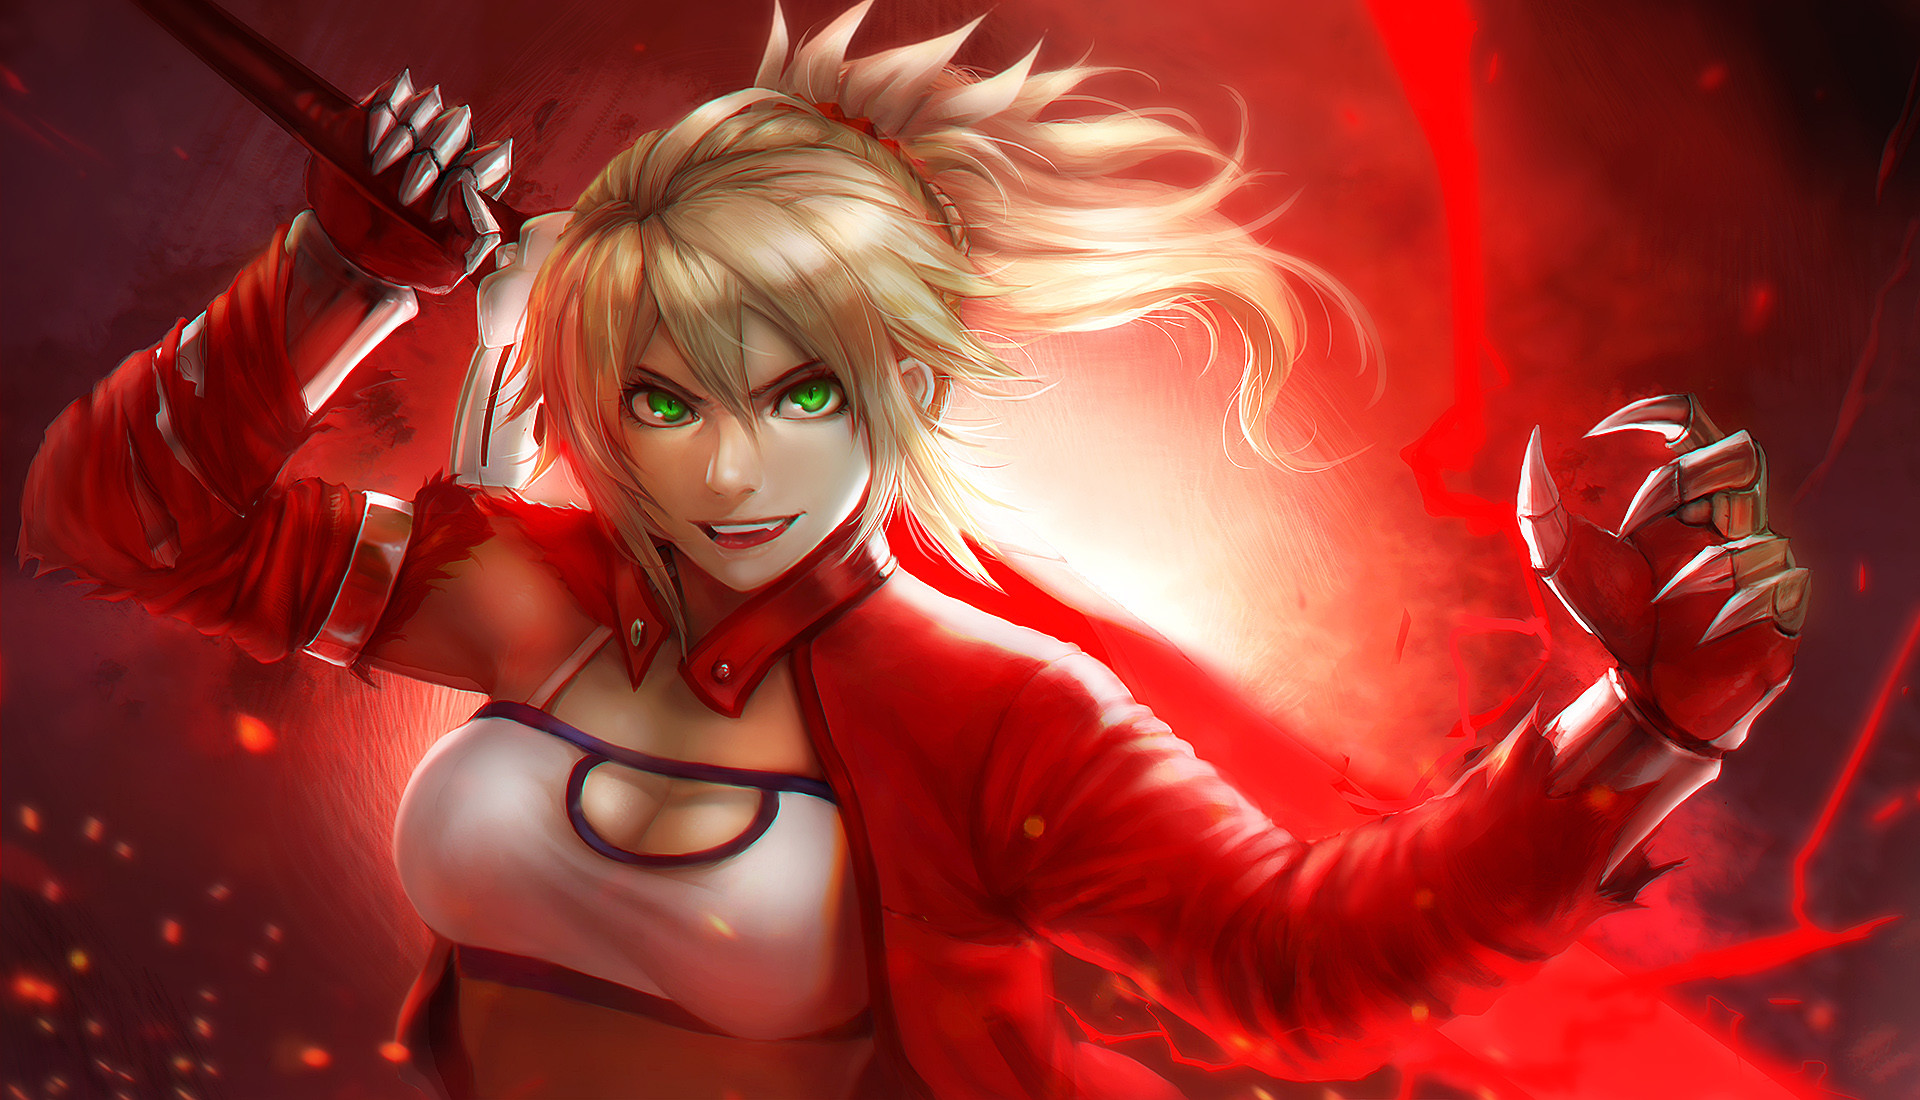 Mordred Fate Apocrypha Saber Of Red Fate Apocrypha 1920x1100